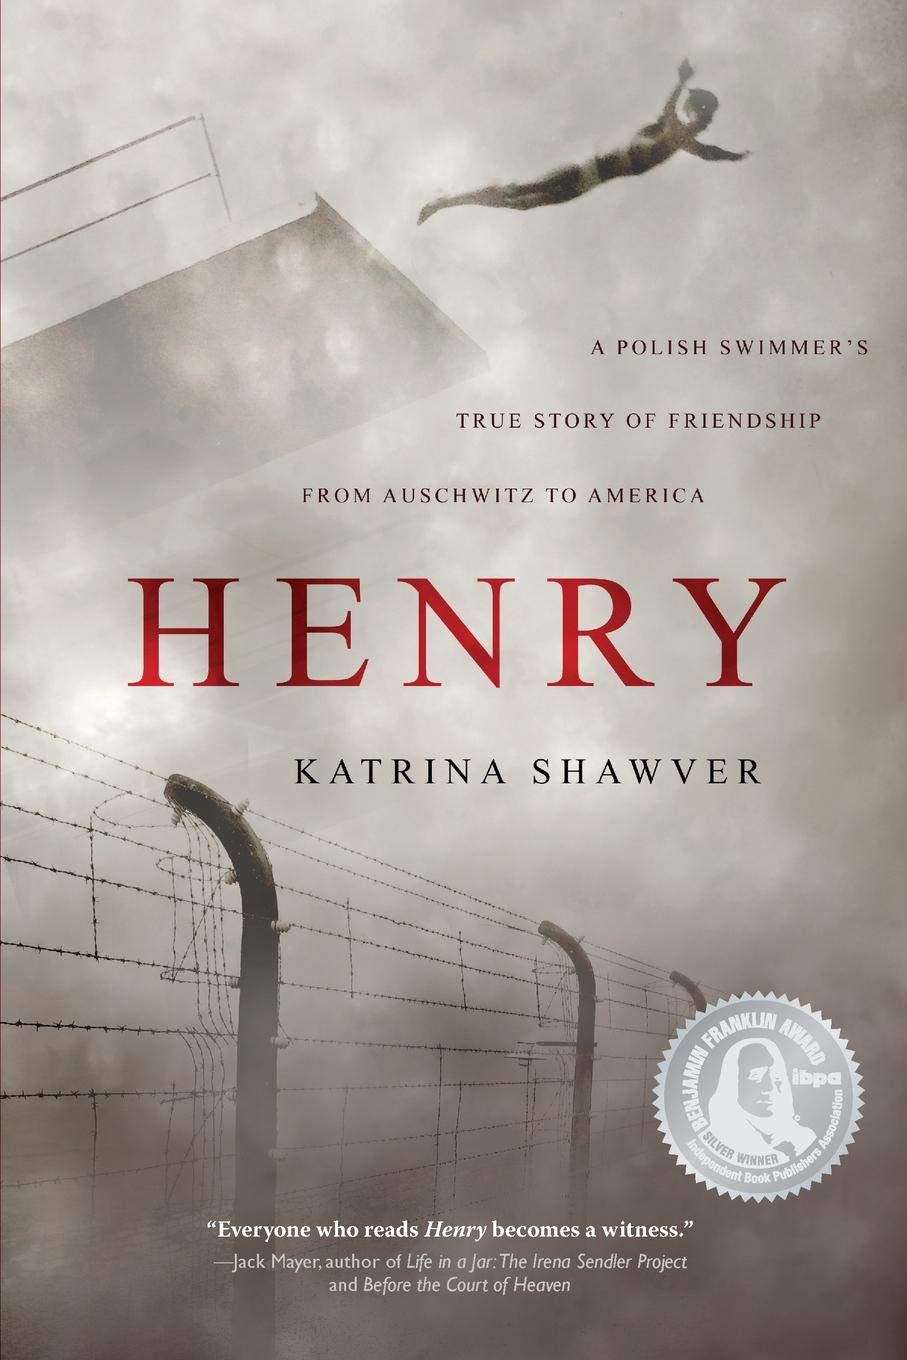 Henry: A Polish Swimmer's True Story of Friendship from Auschwitz to America